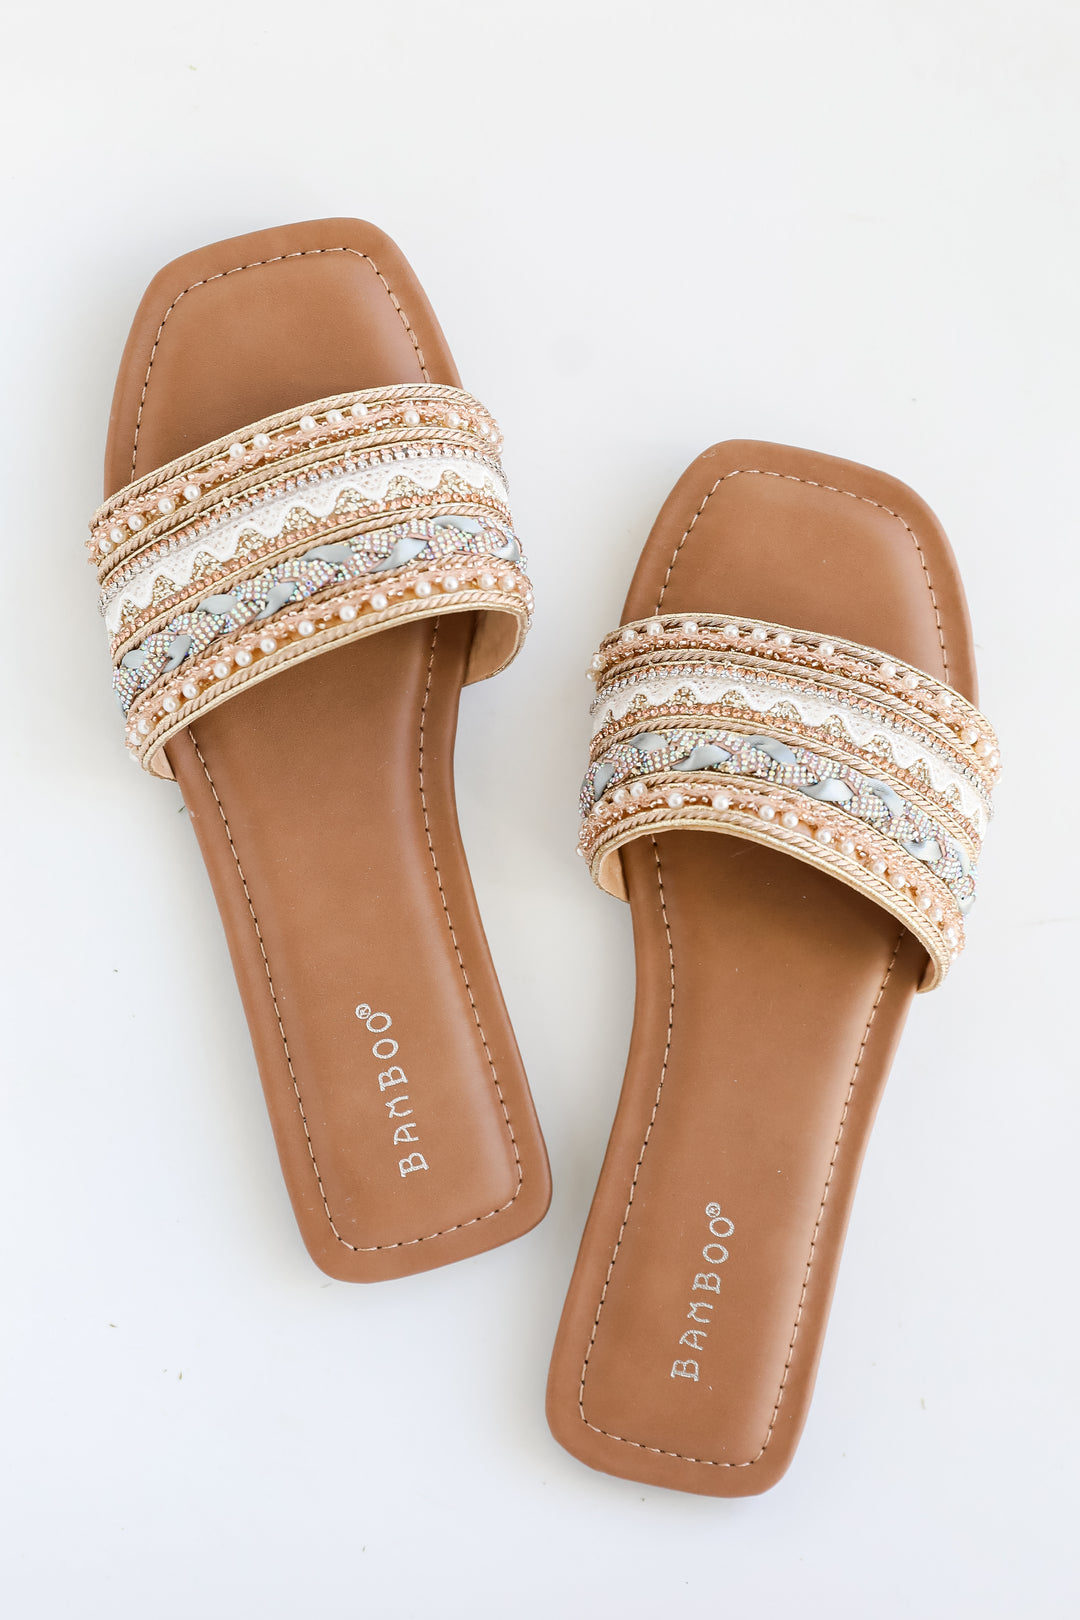 Better Together Gold Beaded Rhinestone Slide Sandals By Bamboo